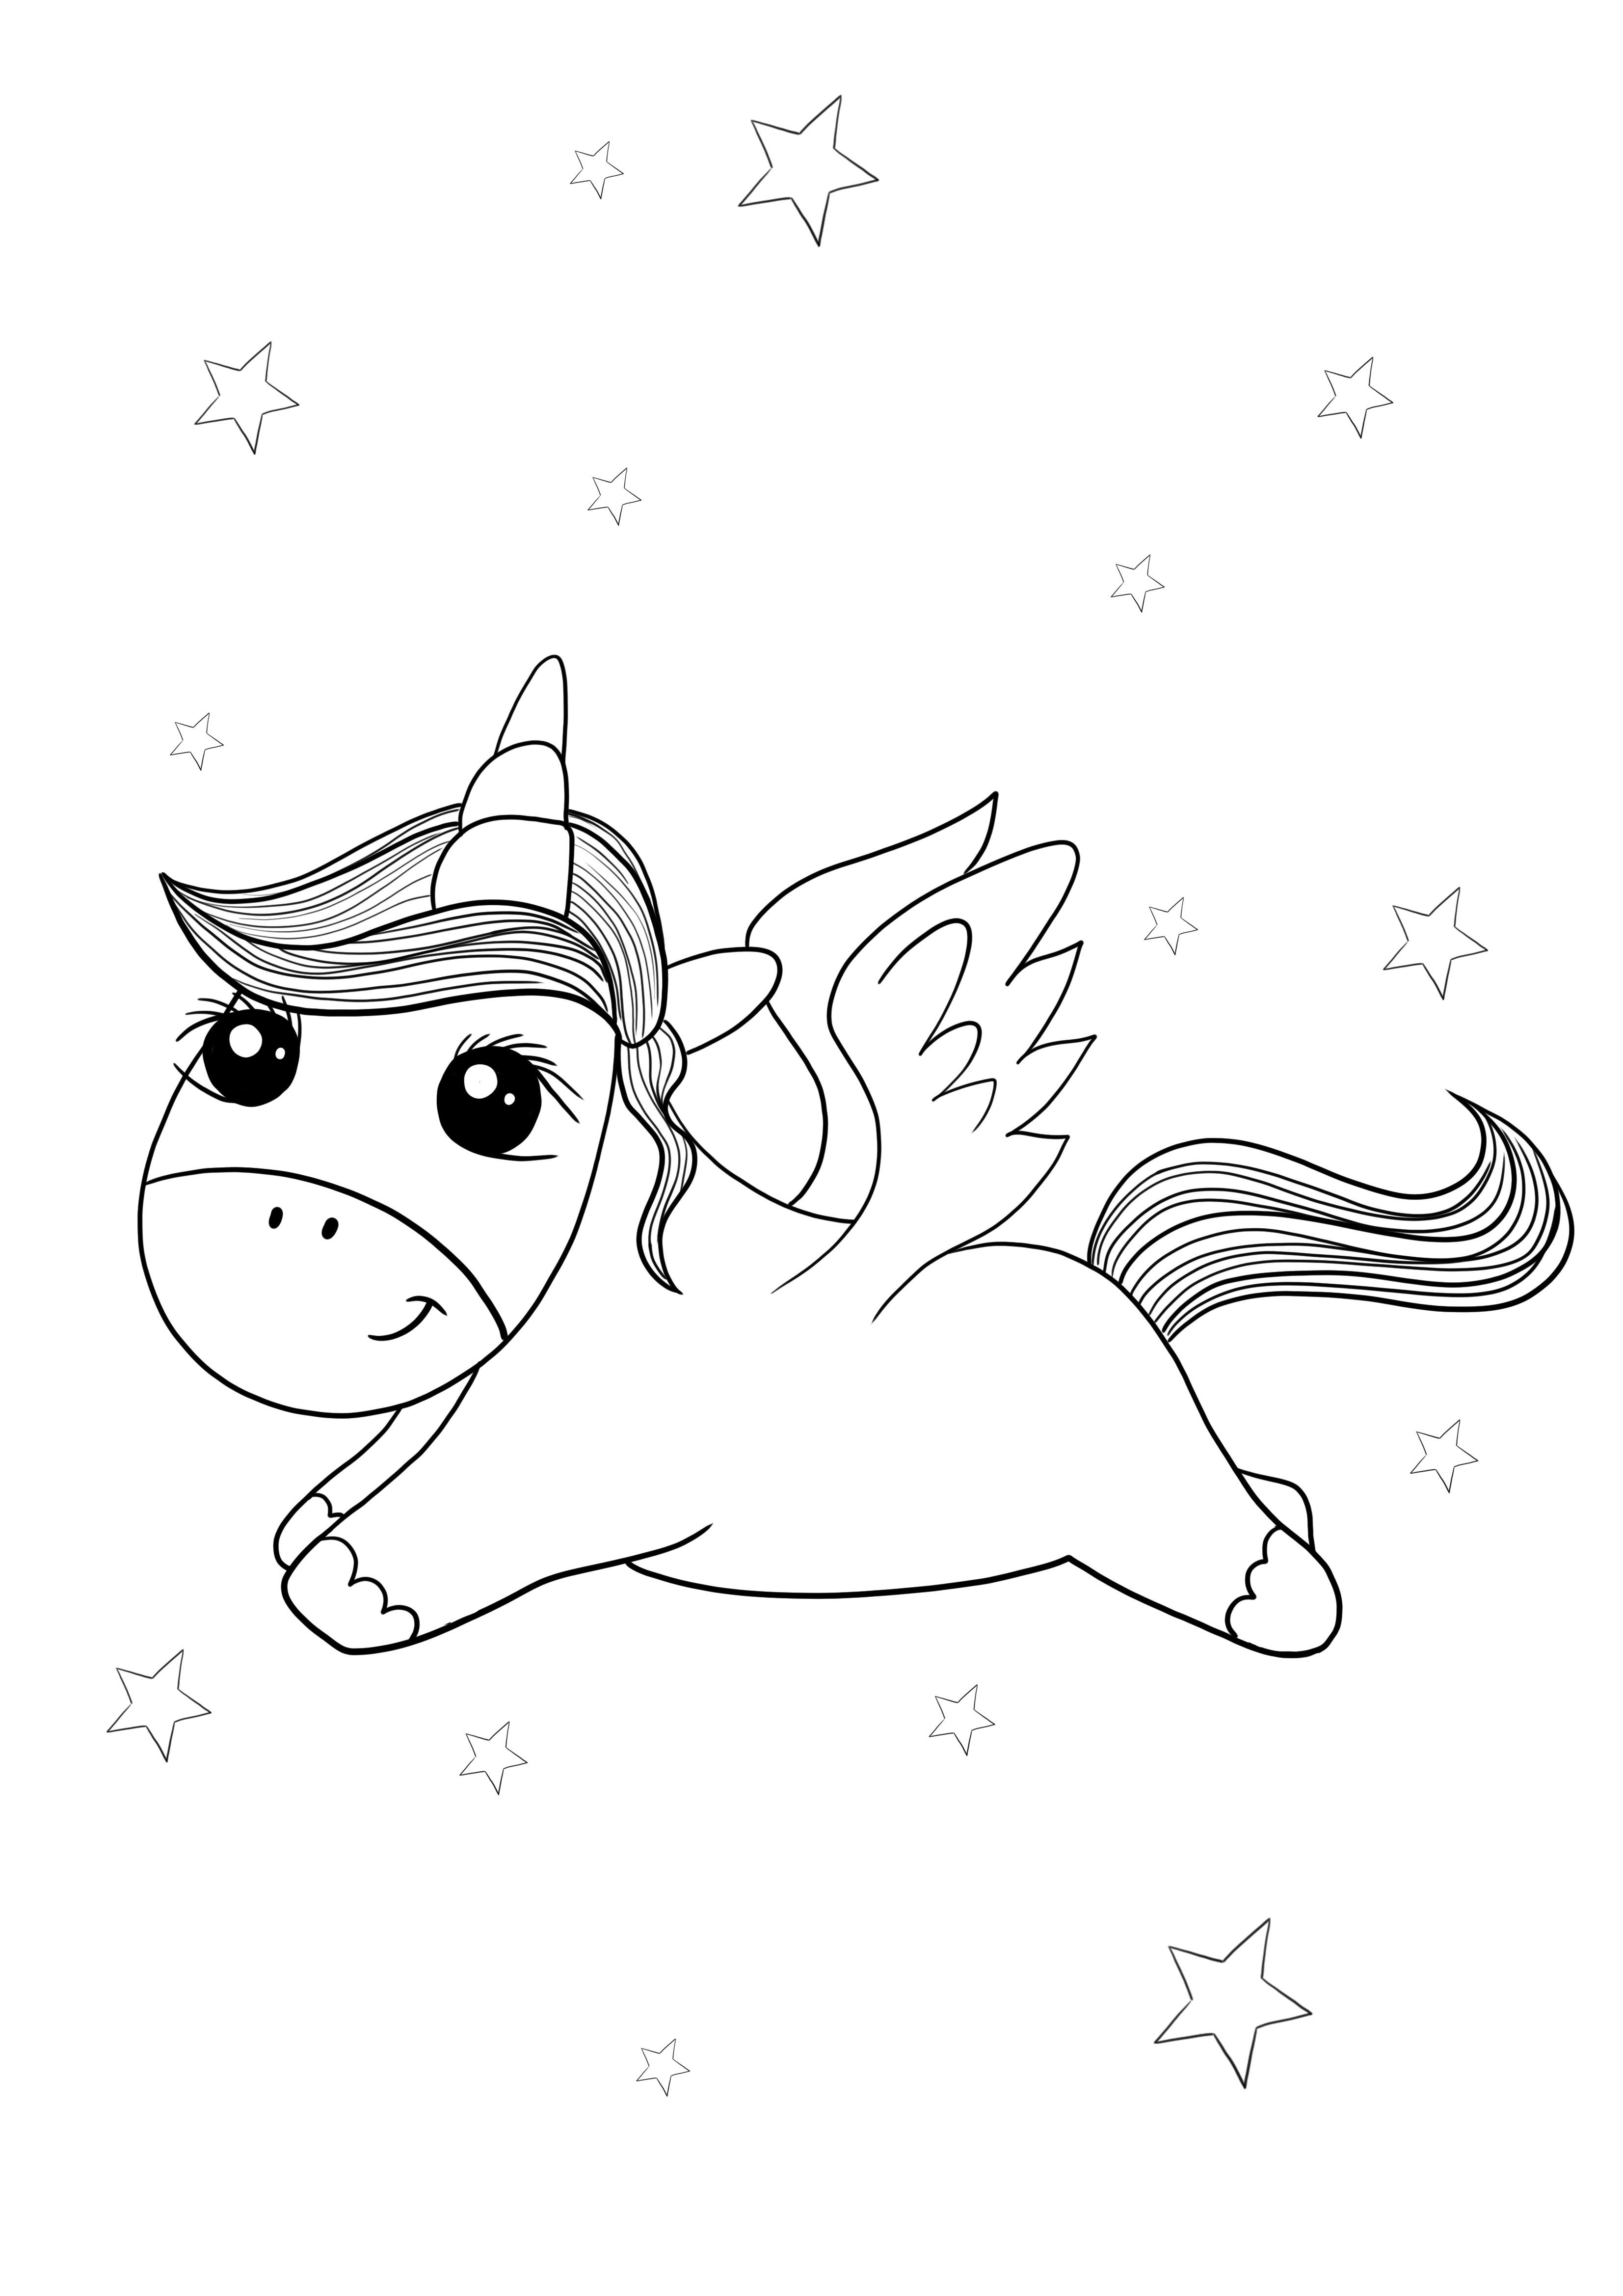 Pegasus unicorn to download page for simple coloring